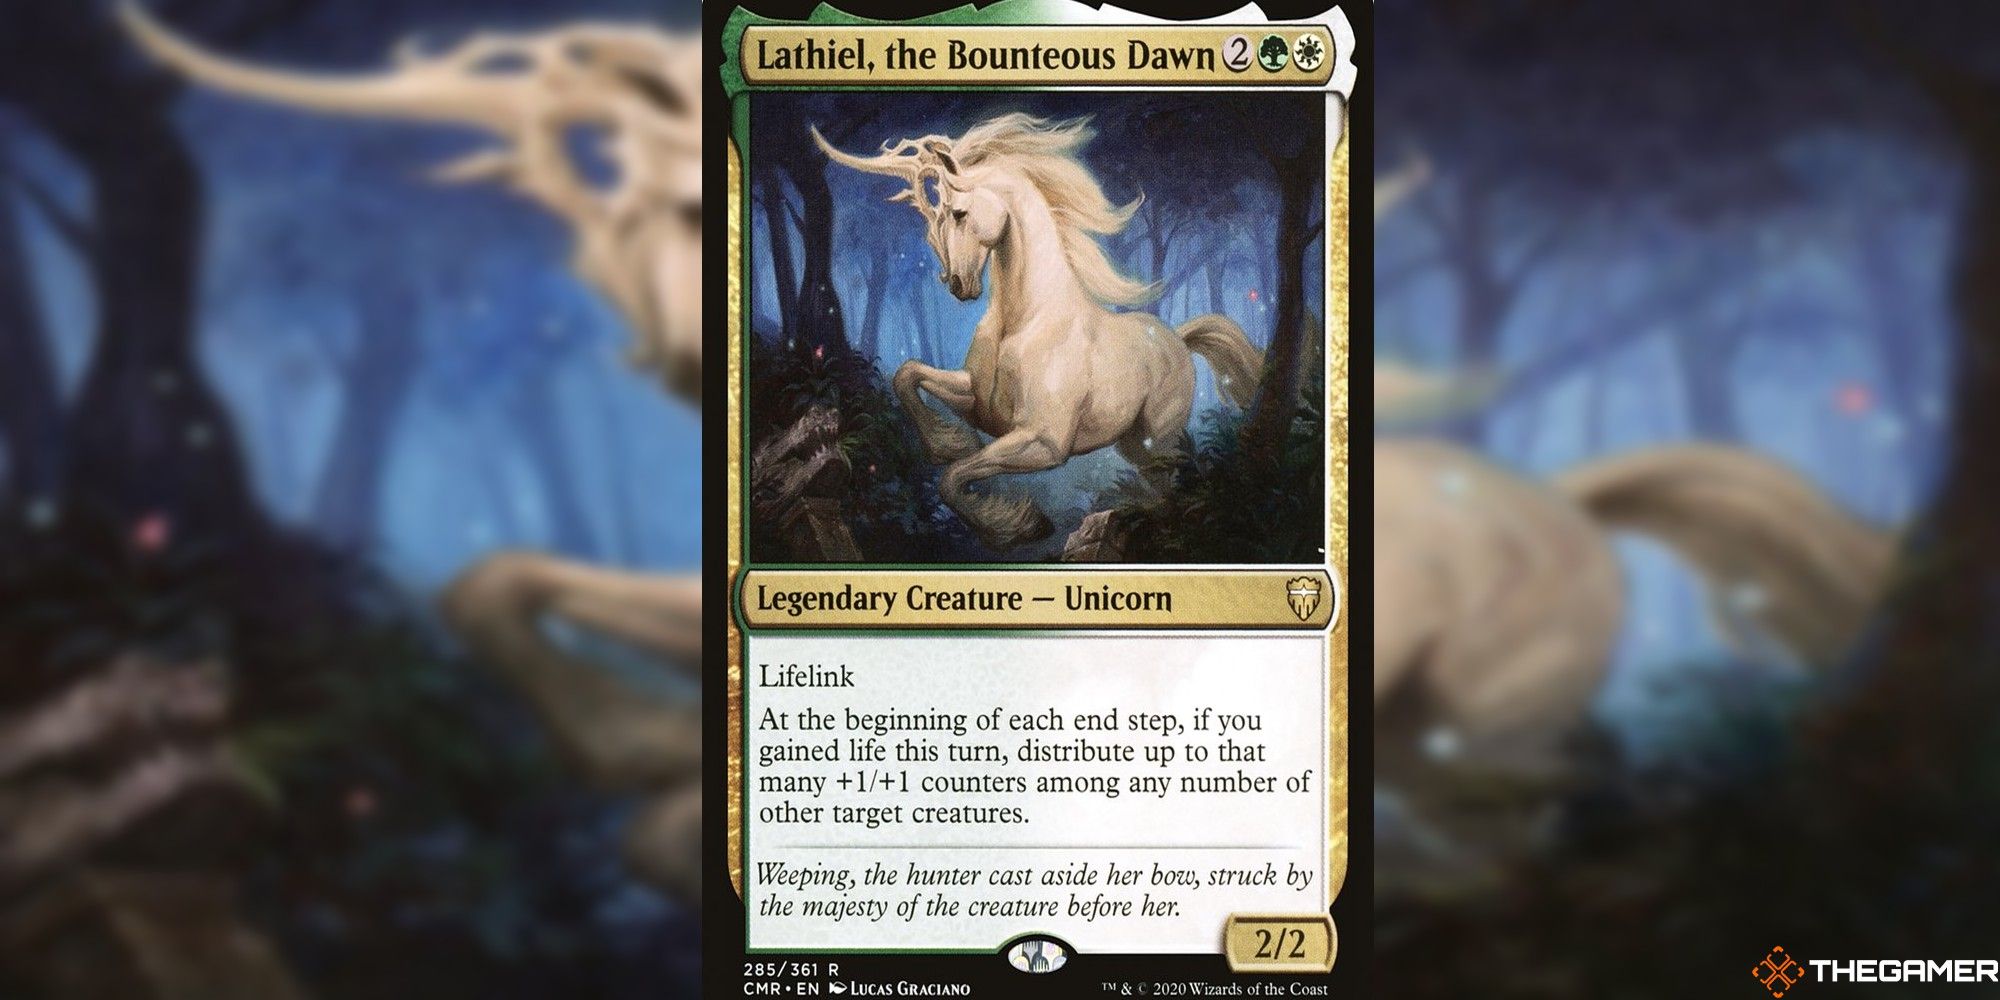 lathiel the bounteous dawn full card and art background